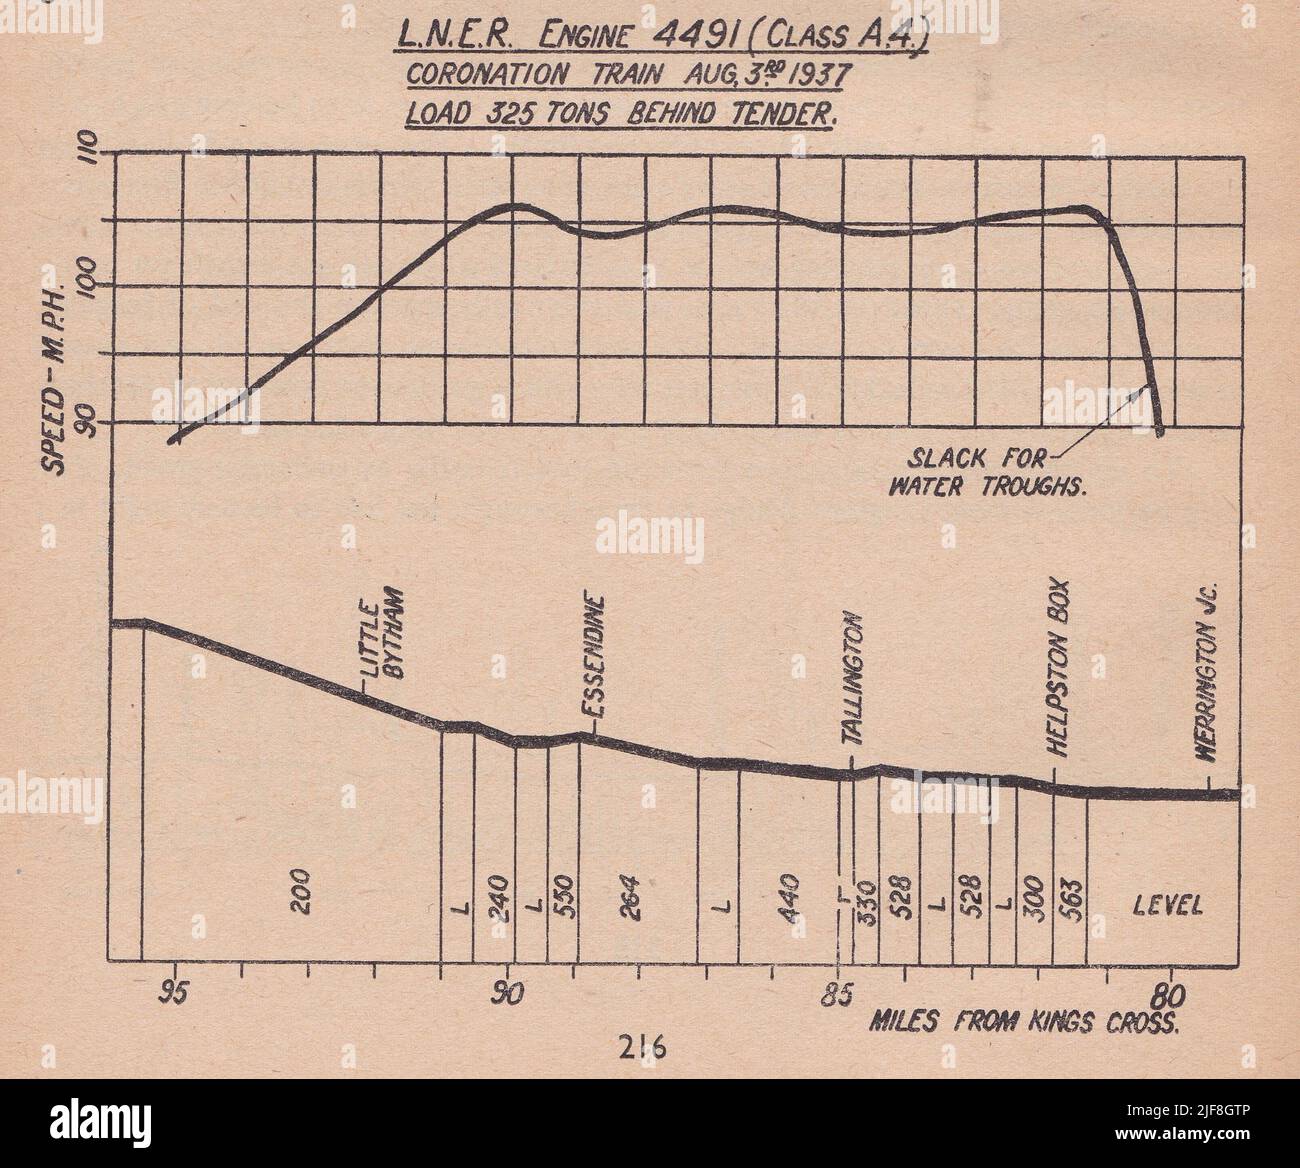 Vintage graph of Performance of L.N.E.R. Engine 4491 (Class A4) Coronation Train August 3rd 1937 Load 325 Tons Behind Tender. Stock Photo